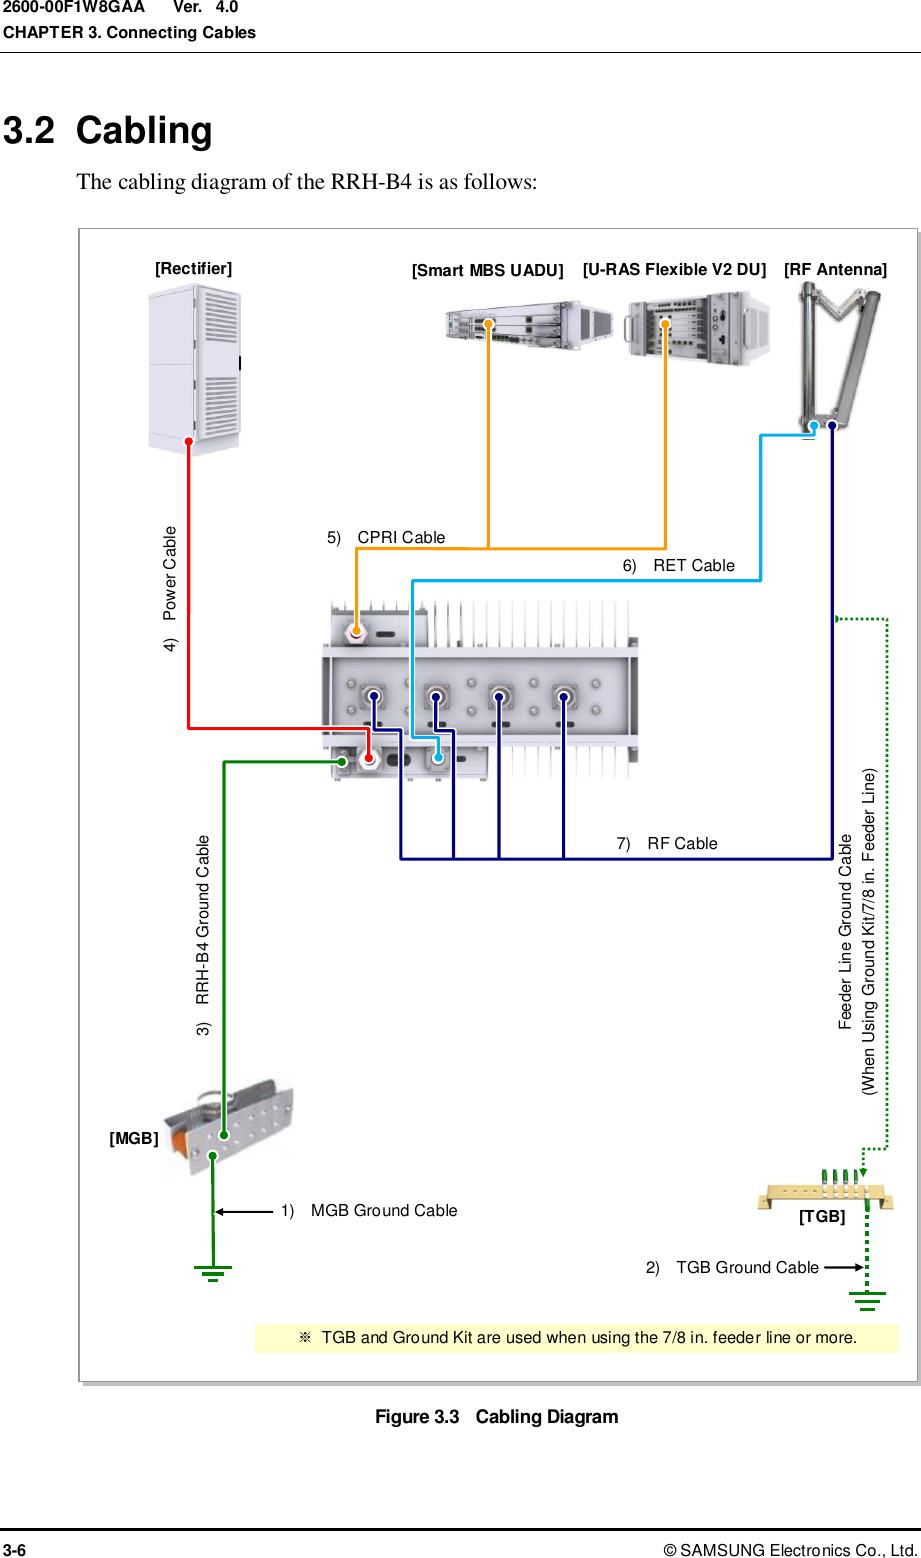  Ver.  CHAPTER 3. Connecting Cables 3-6 ©  SAMSUNG Electronics Co., Ltd. 2600-00F1W8GAA 4.0 3.2  Cabling The cabling diagram of the RRH-B4 is as follows:  Figure 3.3  Cabling Diagram 3)    RRH-B4 Ground Cable [RF Antenna] [MGB] 2)    TGB Ground Cable [TGB] Feeder Line Ground Cable (When Using Ground Kit/7/8 in. Feeder Line) ※  TGB and Ground Kit are used when using the 7/8 in. feeder line or more. [Rectifier] [Smart MBS UADU] 4)    Power Cable 1)    MGB Ground Cable 5)    CPRI Cable 6)    RET Cable 7)    RF Cable [U-RAS Flexible V2 DU] 